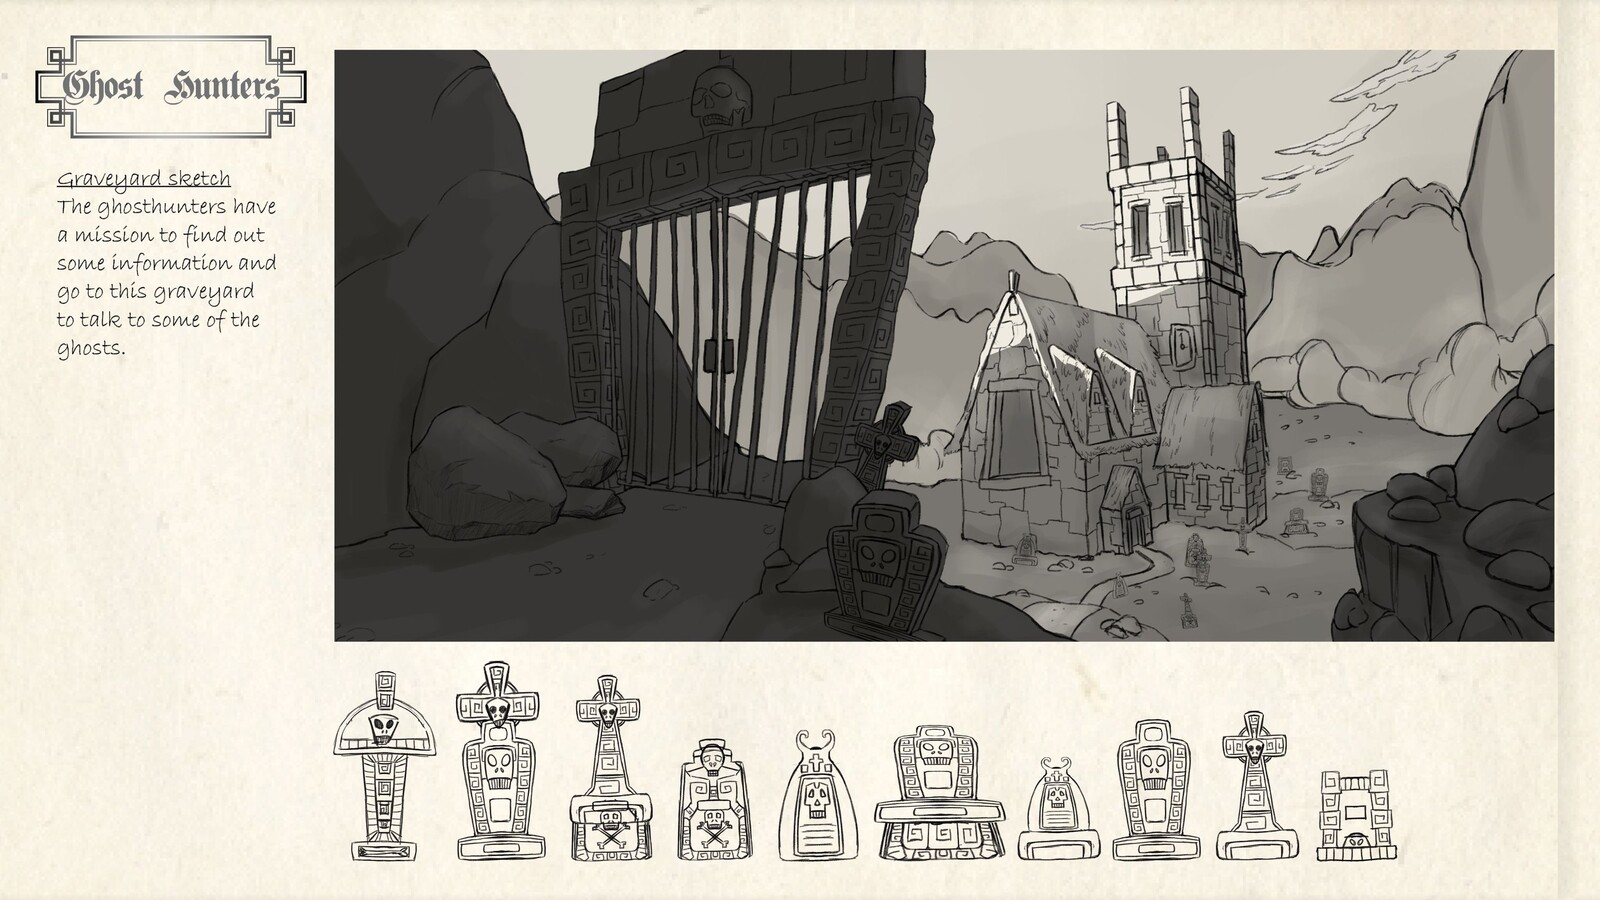 Environment sketches for the Ghost hunters project